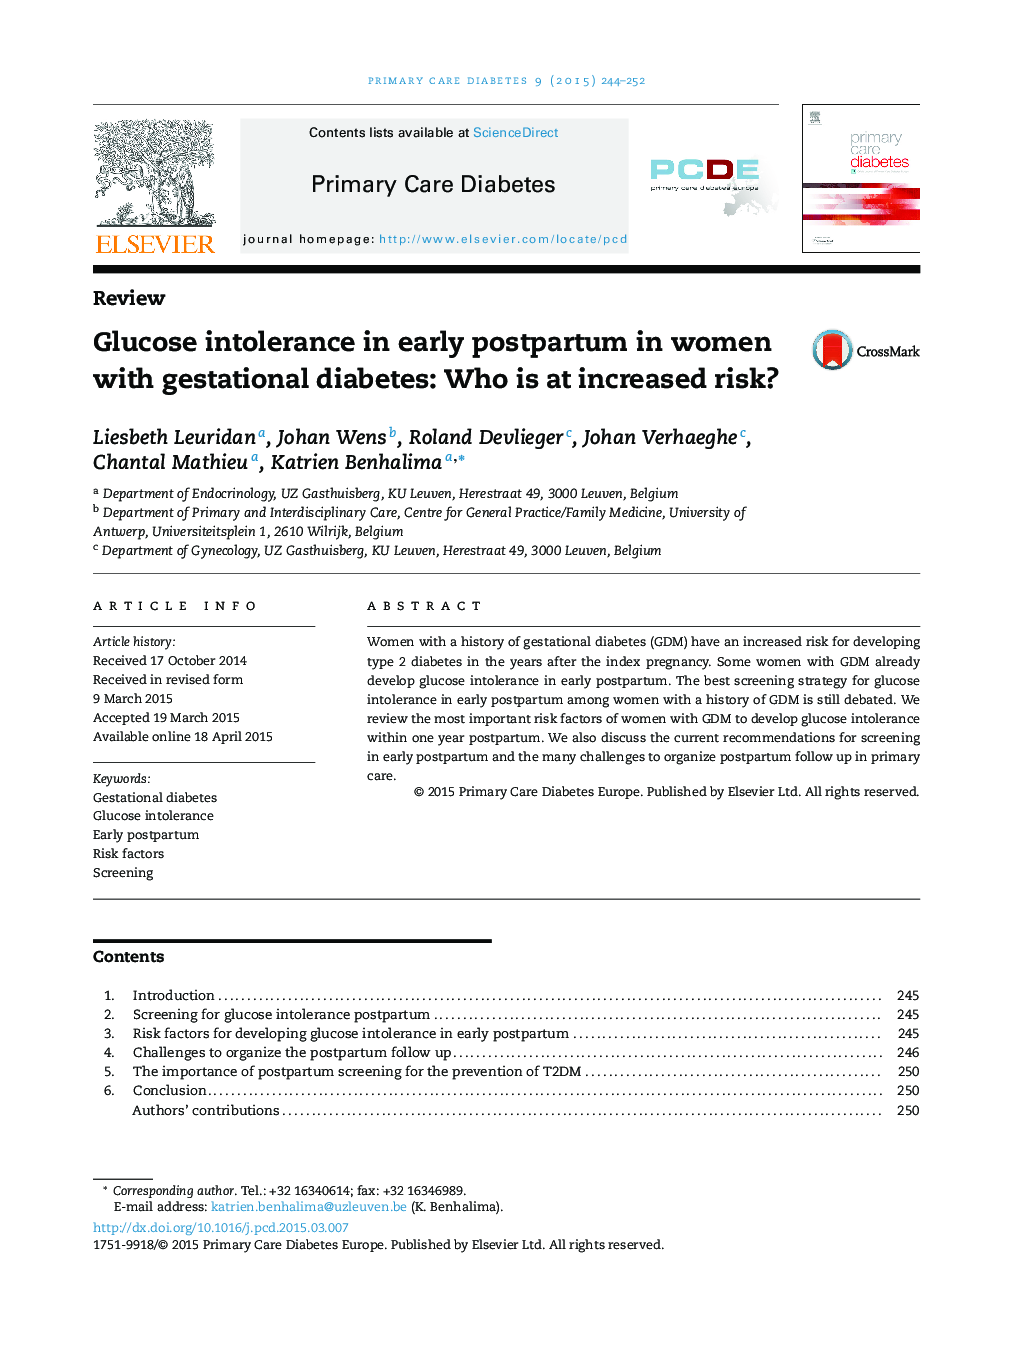 Glucose intolerance in early postpartum in women with gestational diabetes: Who is at increased risk?